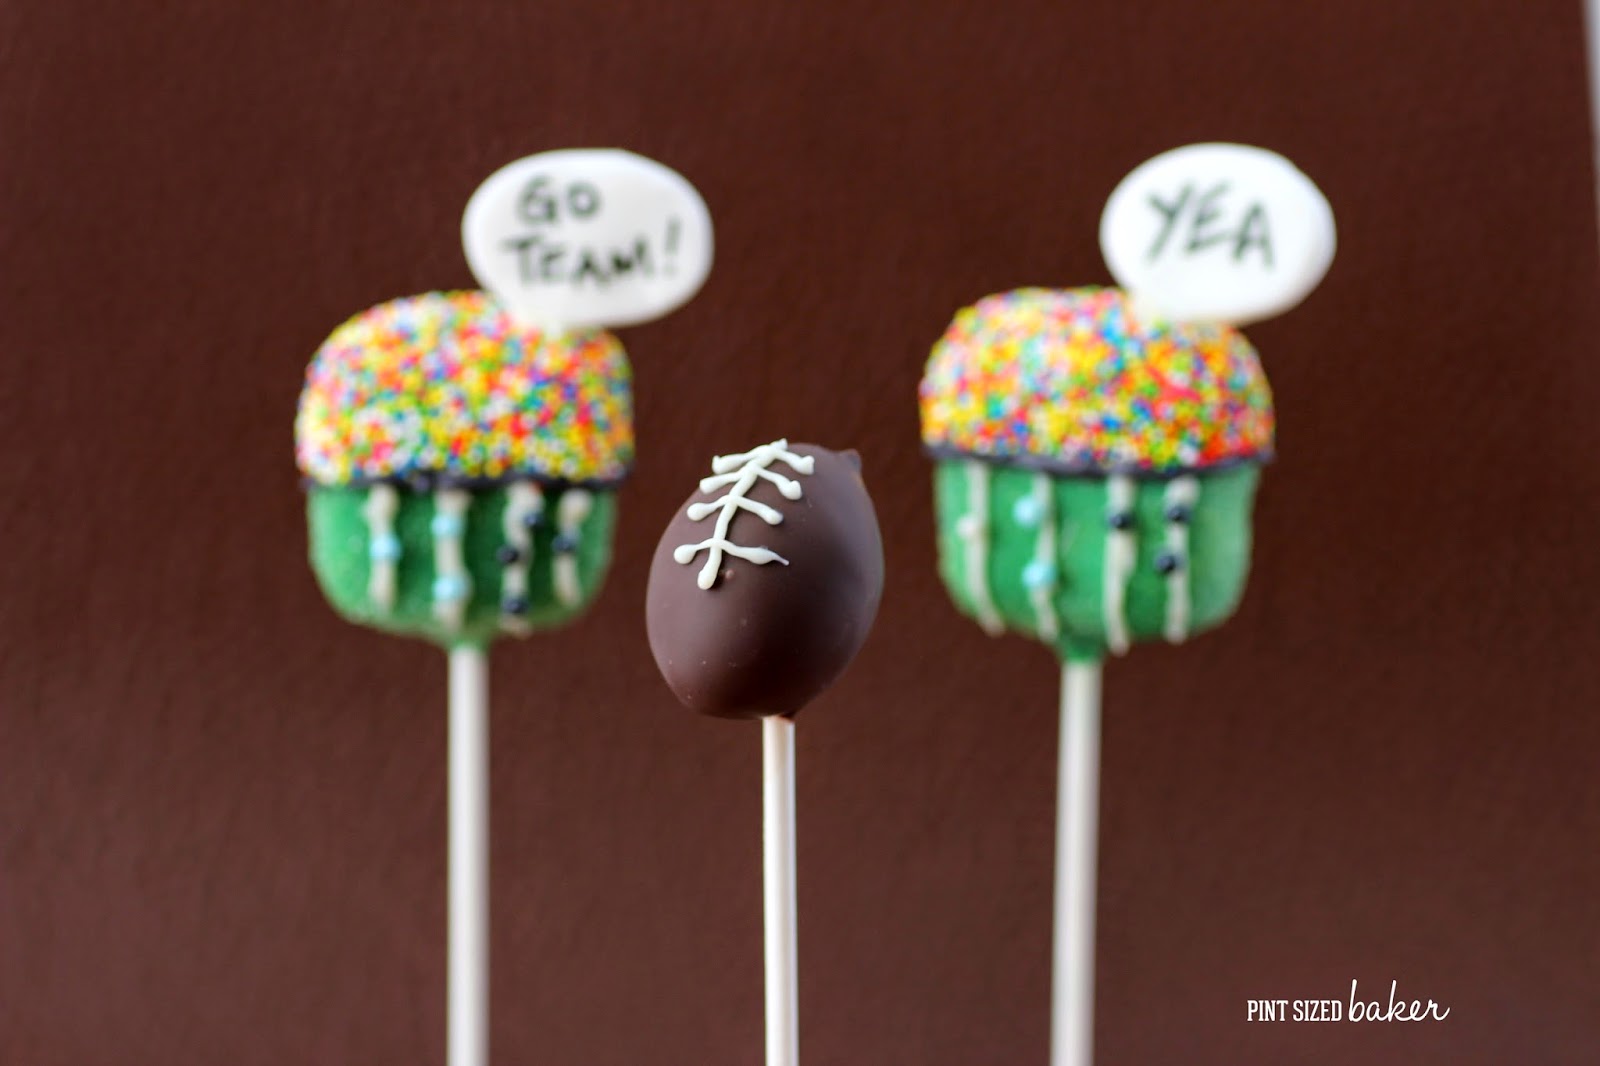 Grab the kids and get ready for FOOTBALL season! You can follow this football and stadium cake pop tutorial and bring them to the kids pee-wee game or serve them at your Monday Night Football Game party!